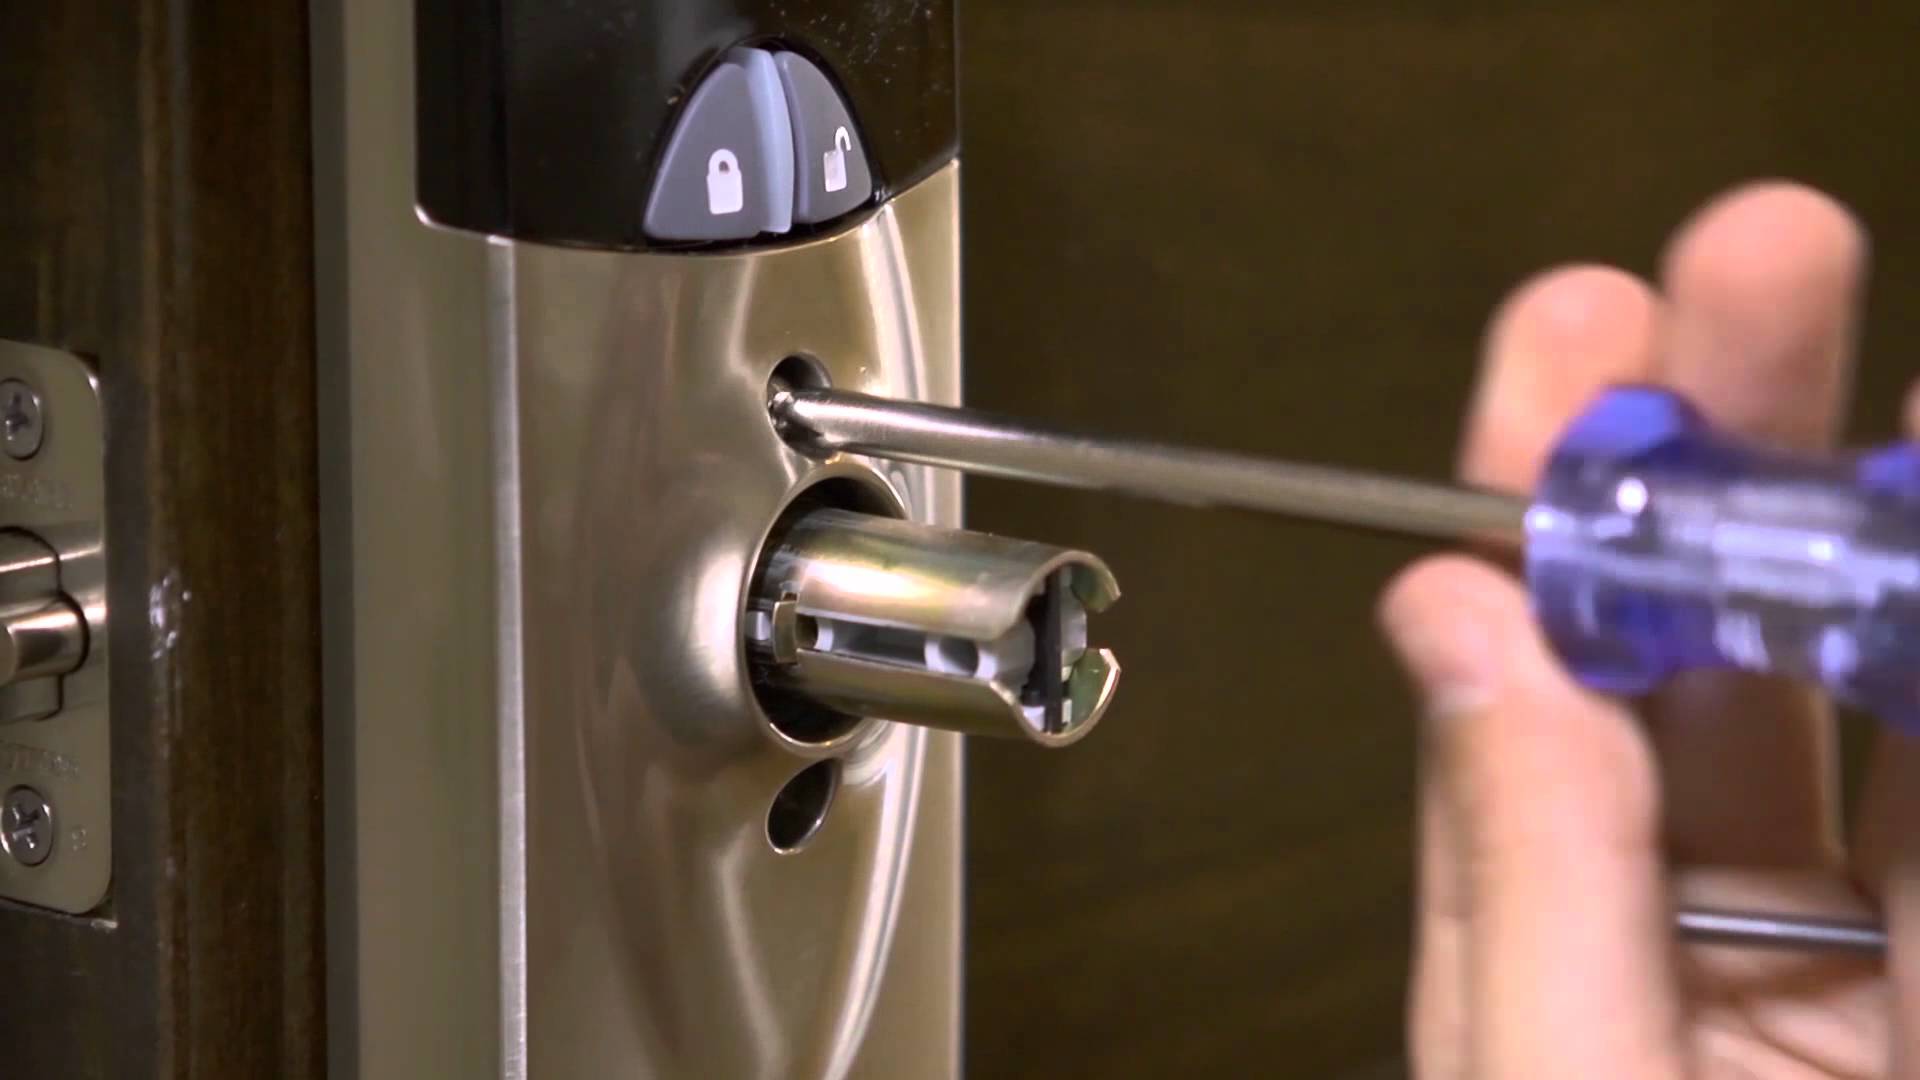 What to ask a locksmith before hiring?